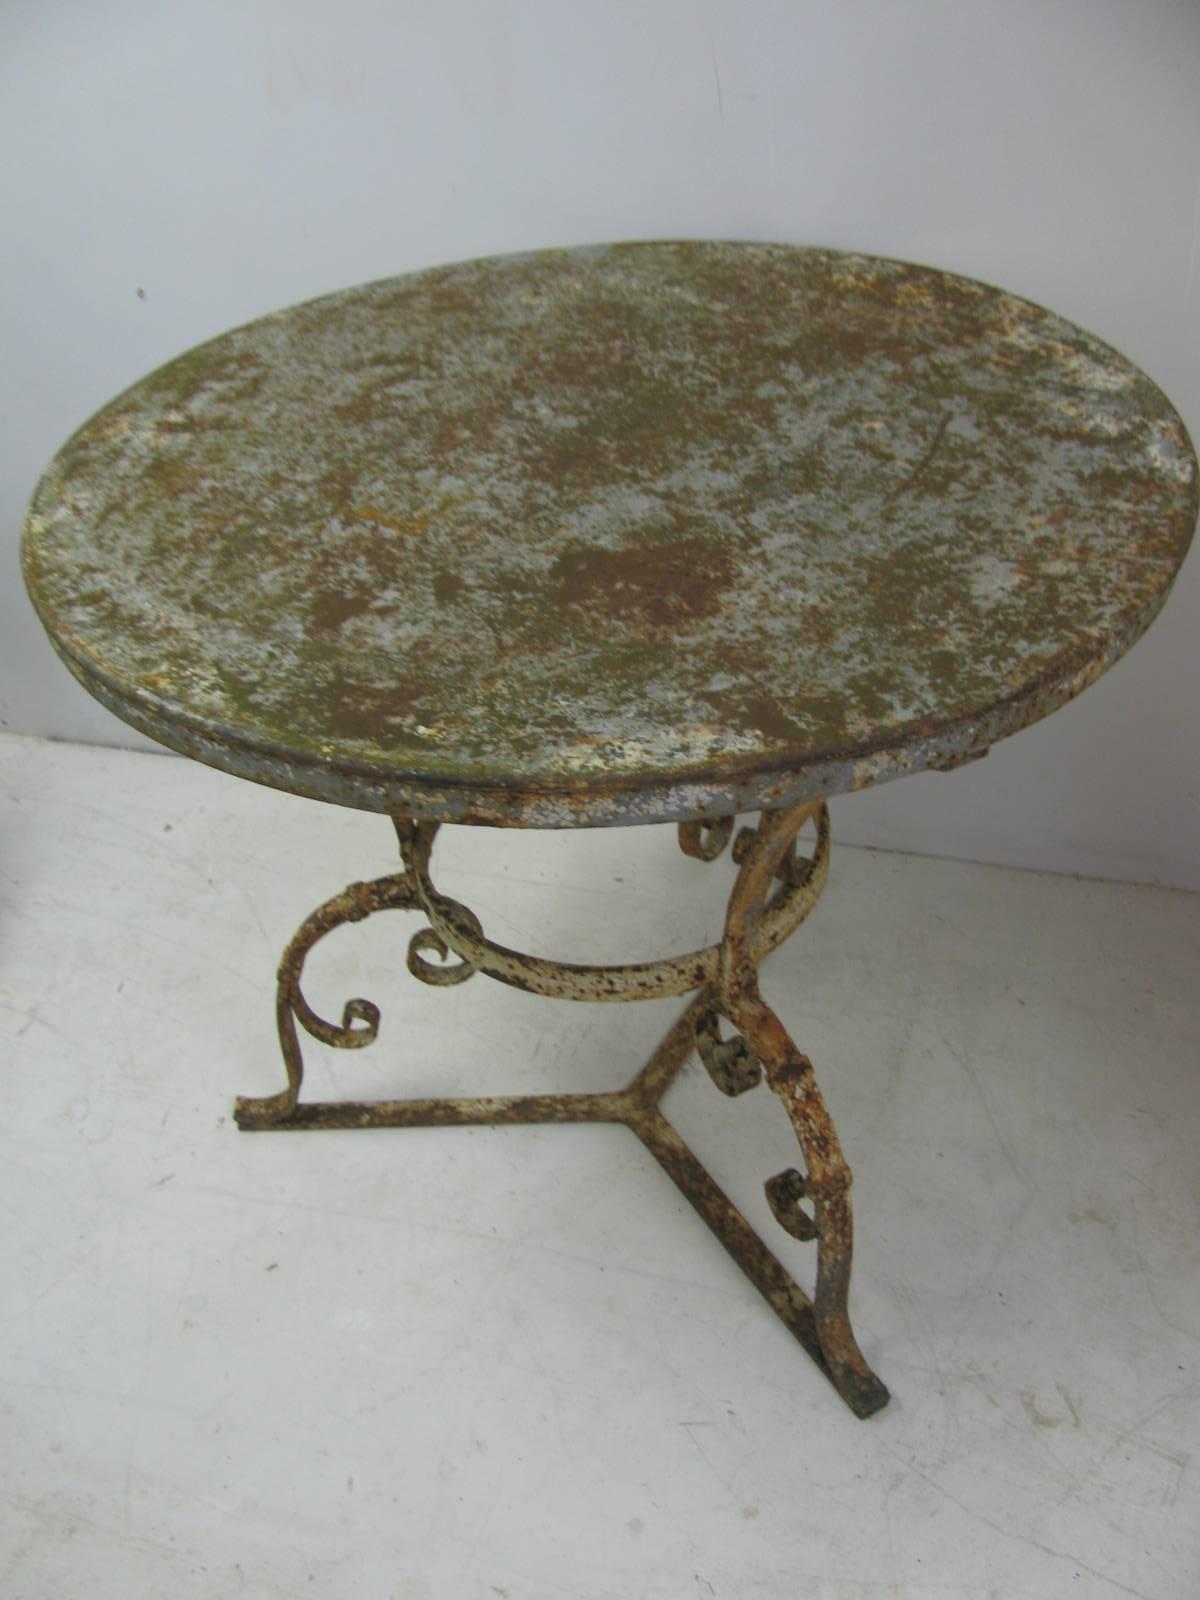 Neoclassical Late 19th Century Hand-Wrought Iron Garden Table